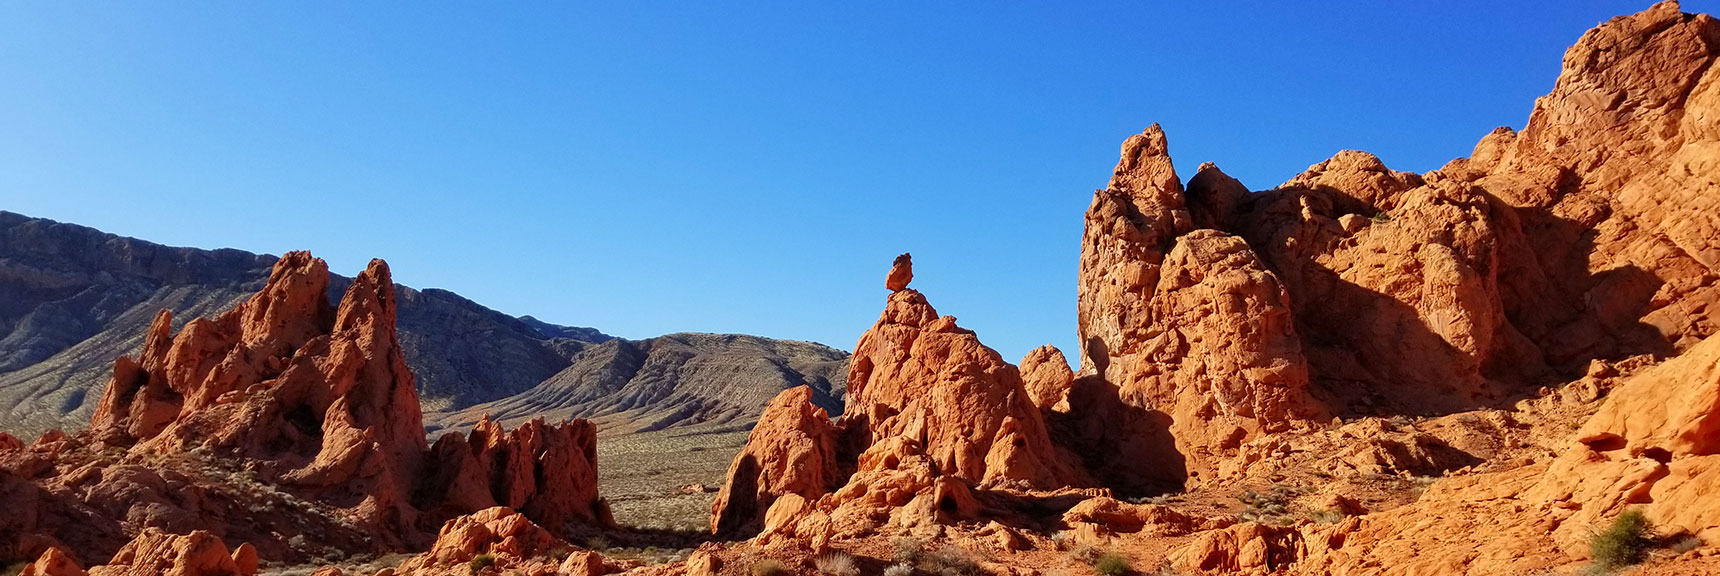 Pinnacles Loop Trail in Valley of Fire State Park, Nevada